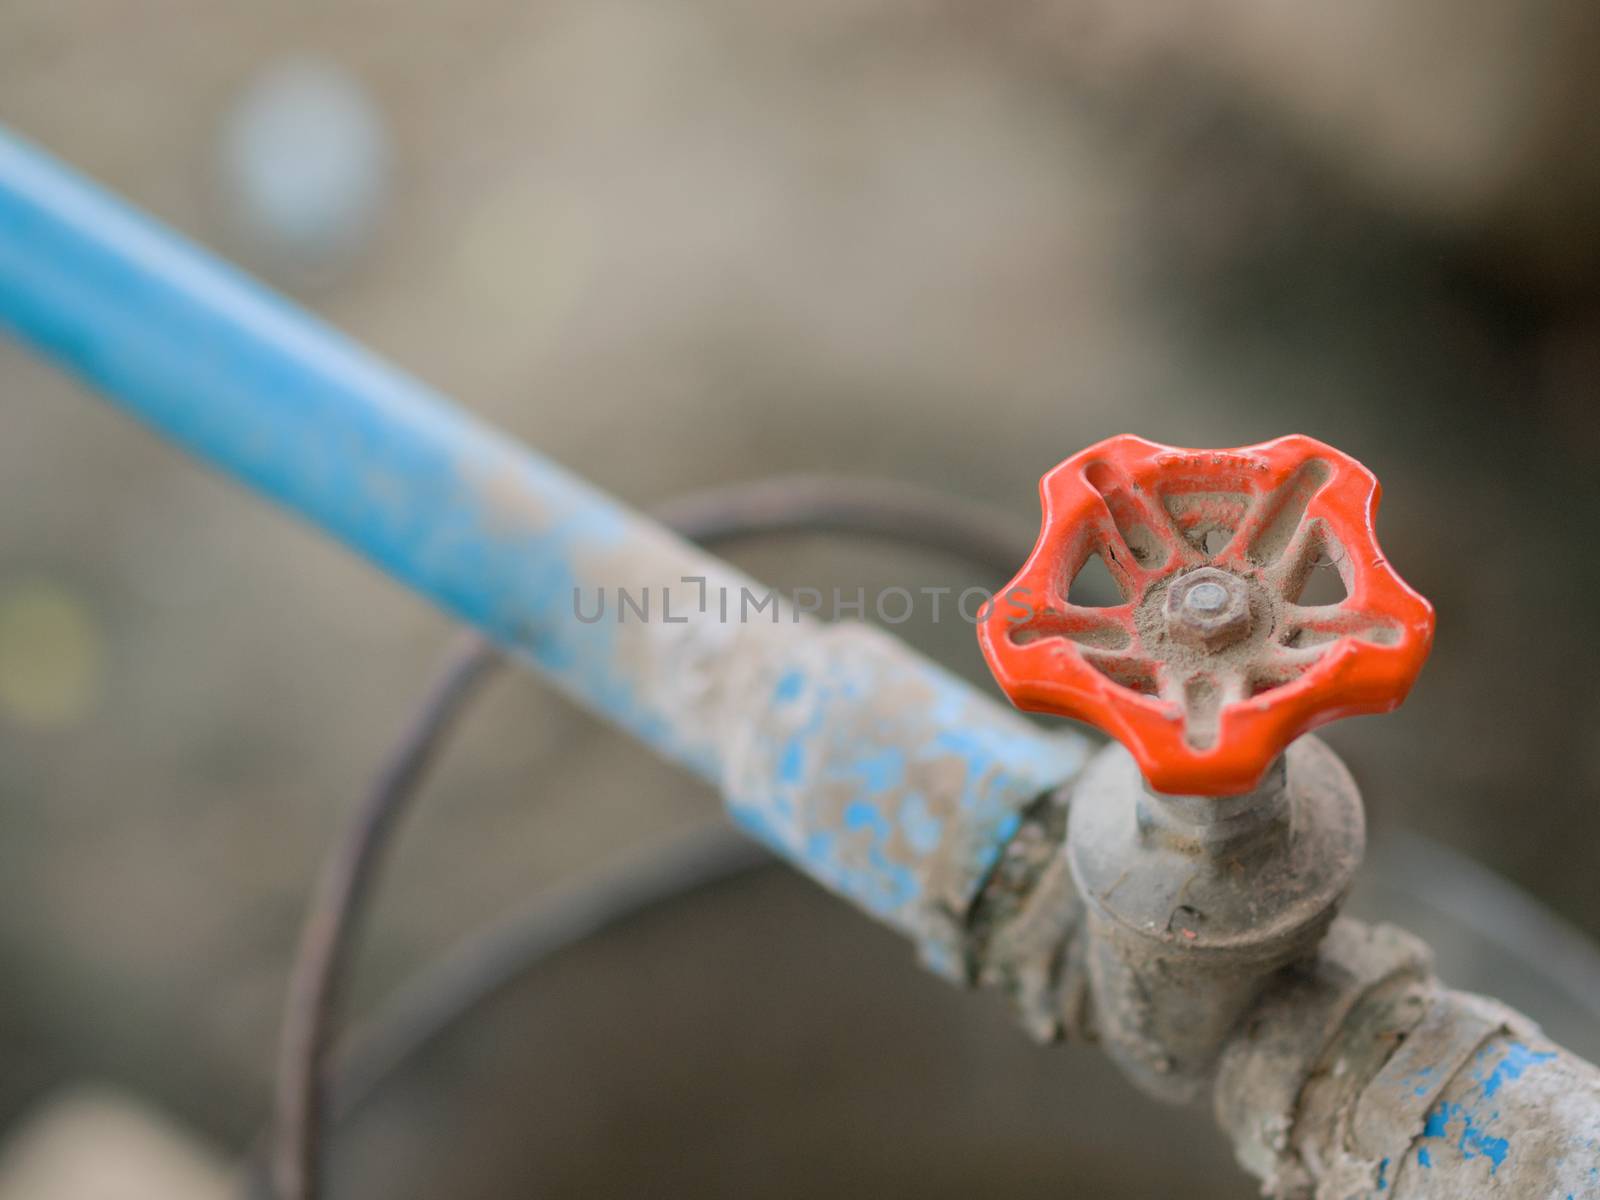 COLOR PHOTO OF CLOSE-UP SHOT OF METAL TAP